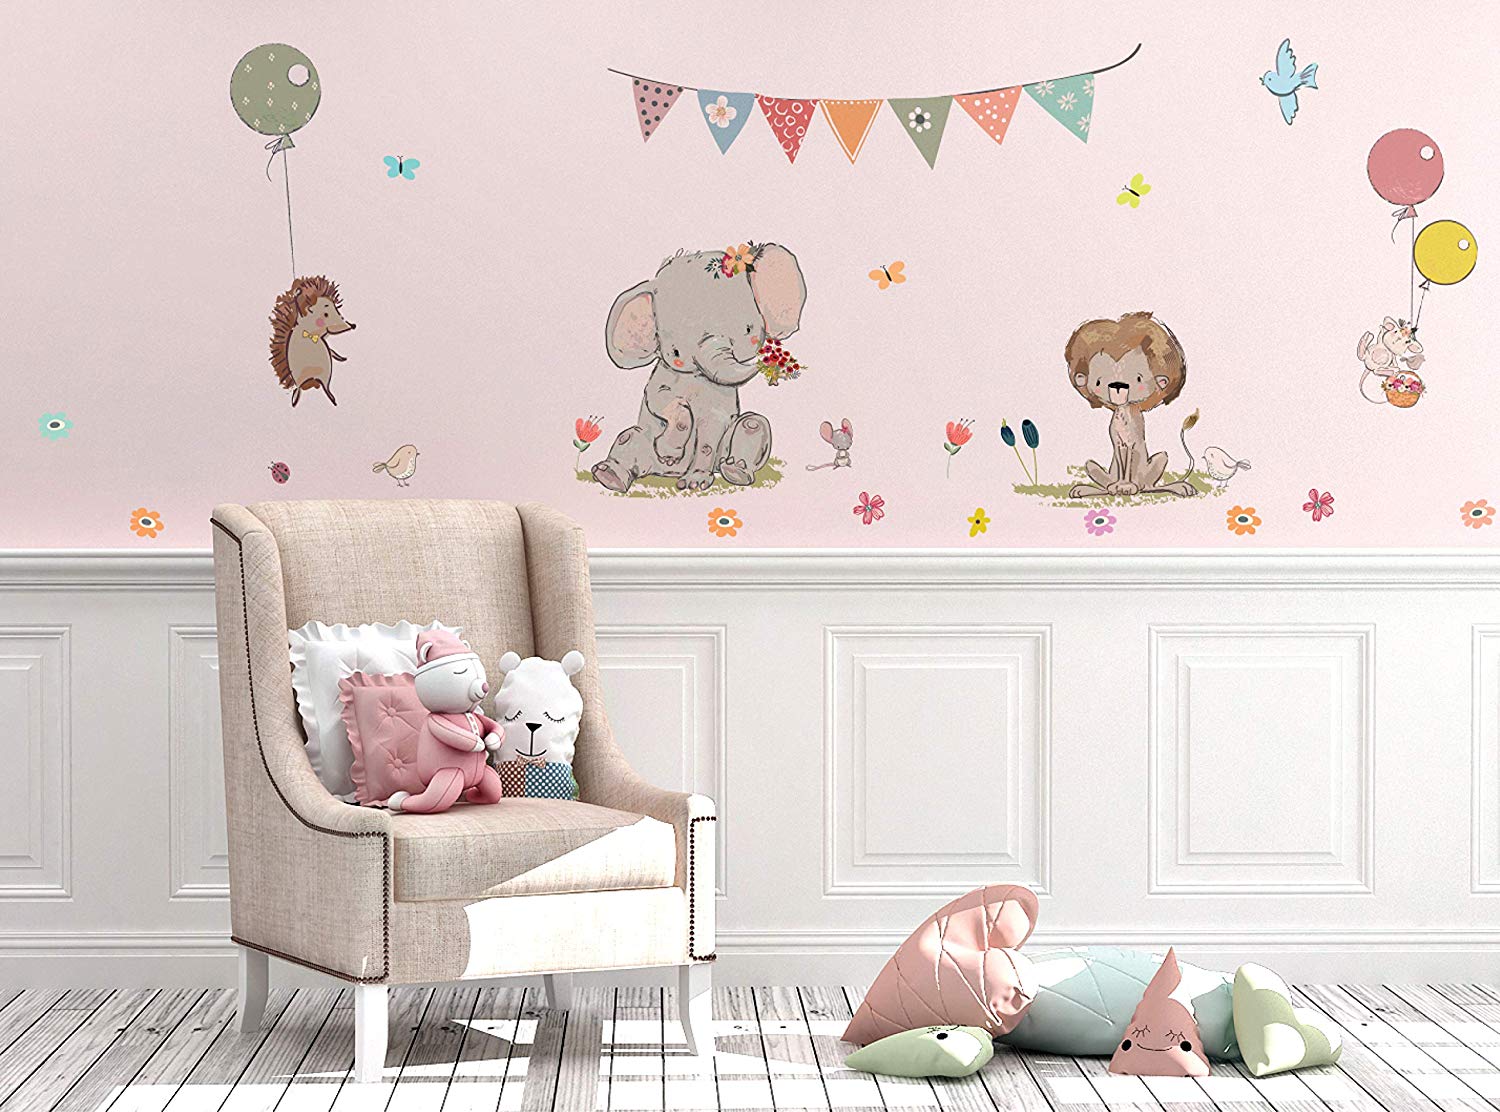 Traveller Location: Kids Wall Decals Stickers Nursery Decor Baby Room Decor Nursery  Wall Stickers Safari Woodland Scene for Baby Toddler Boys & Girls Rooms  Peel and